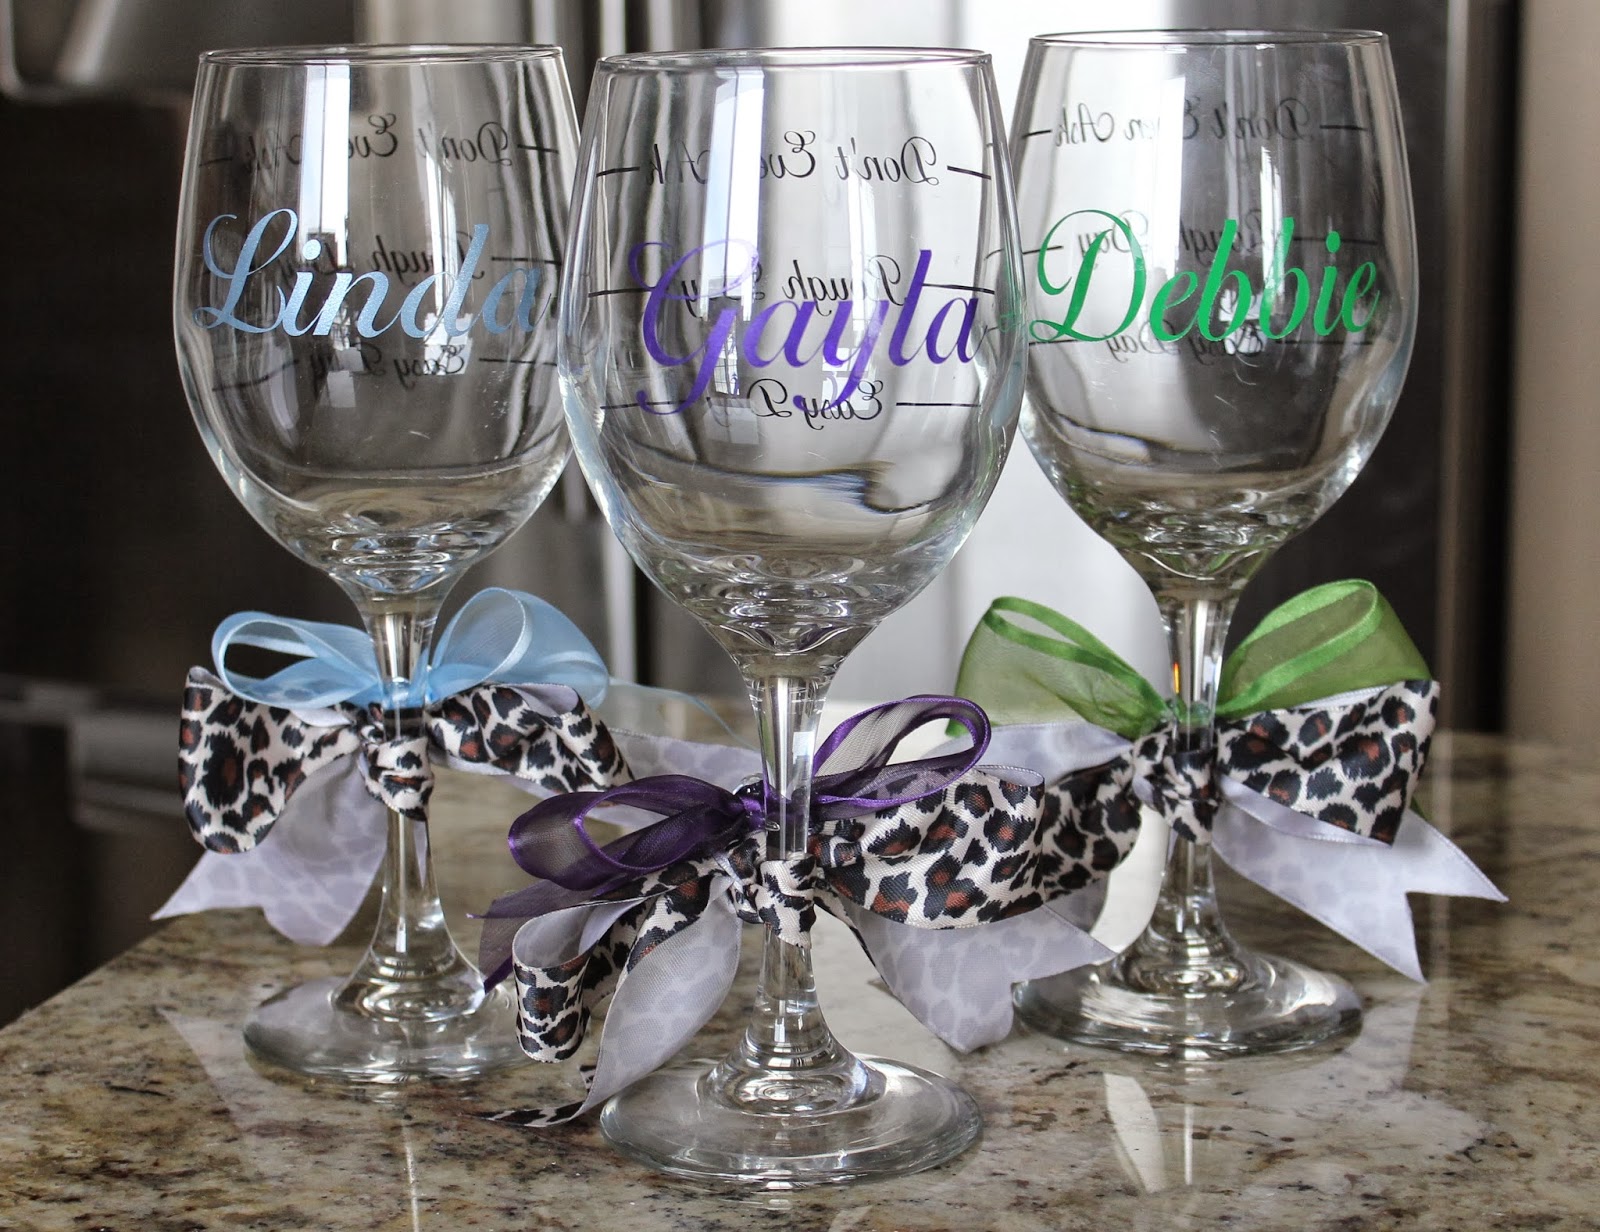 Cher's Signs by Design: Wine Glasses- Easy Day, Rough Day and Don't